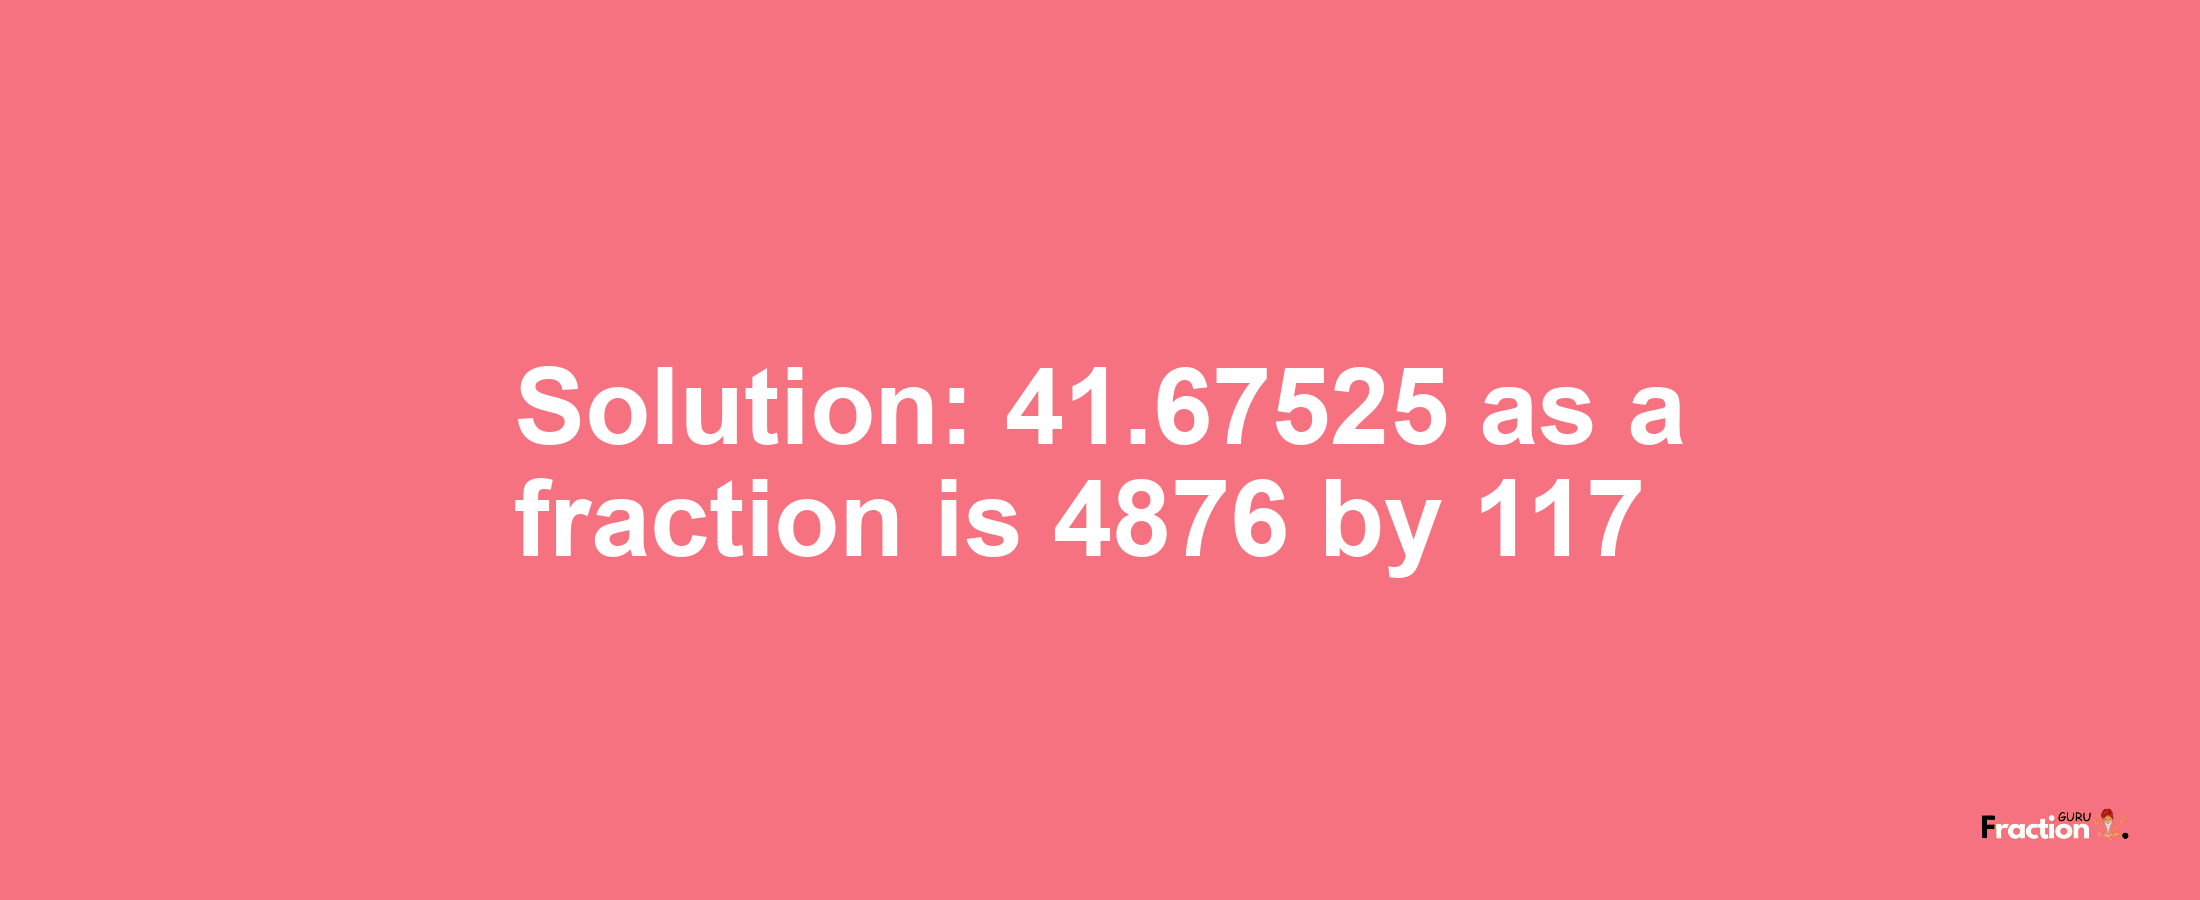 Solution:41.67525 as a fraction is 4876/117